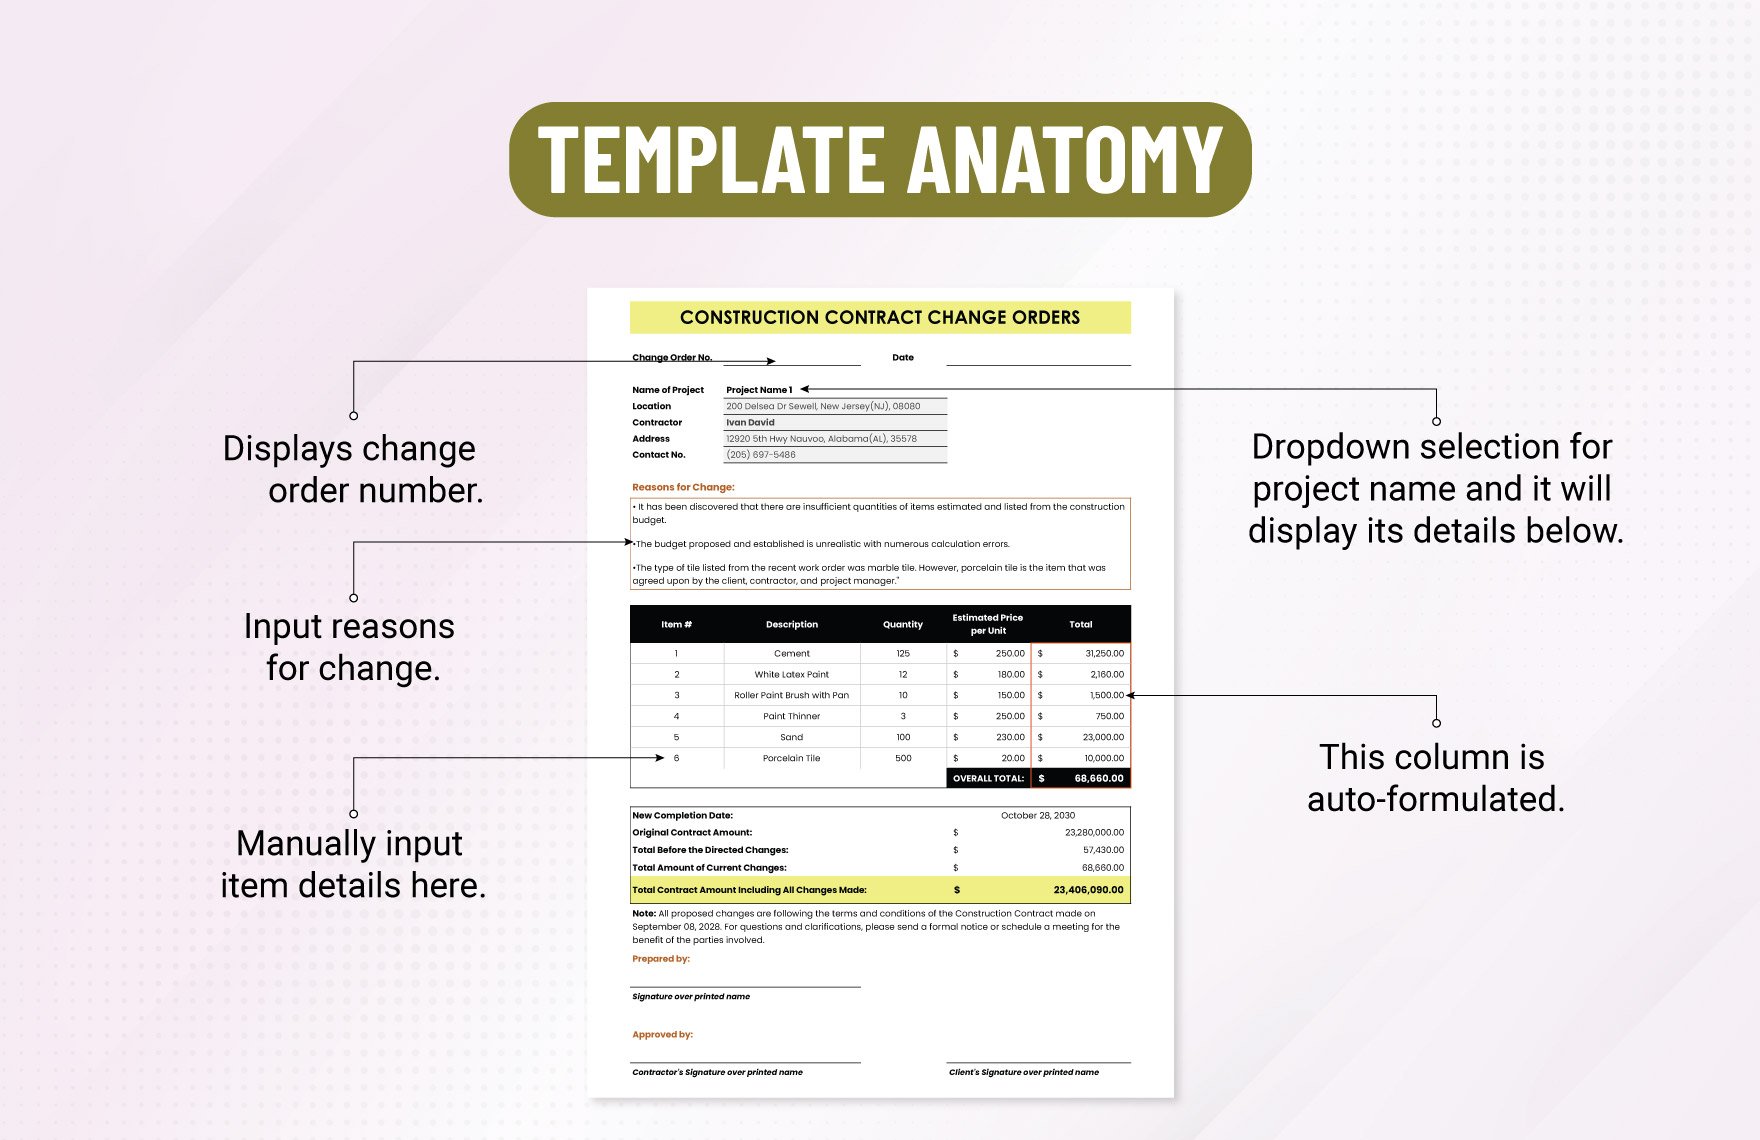 Construction Contract Change Orders Template